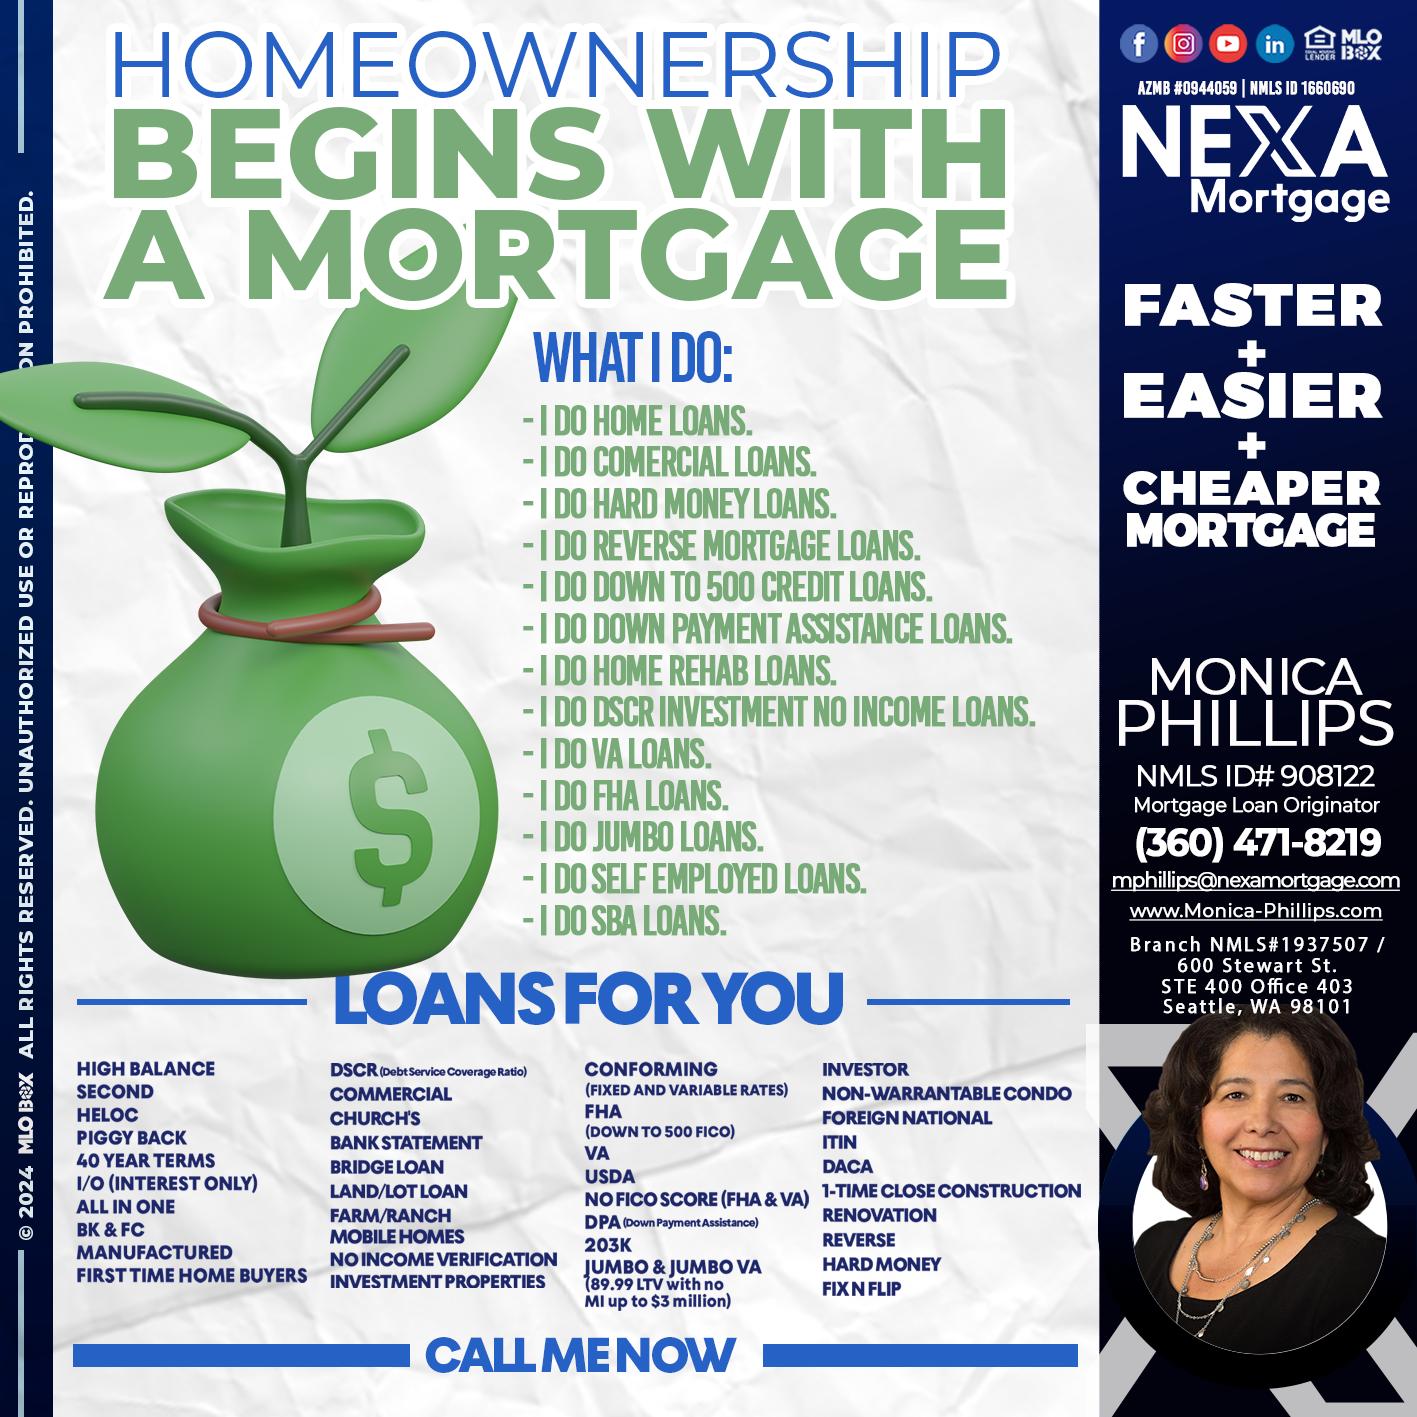 HOME OWNERSHIP - Monica Phillips -Loan Officer